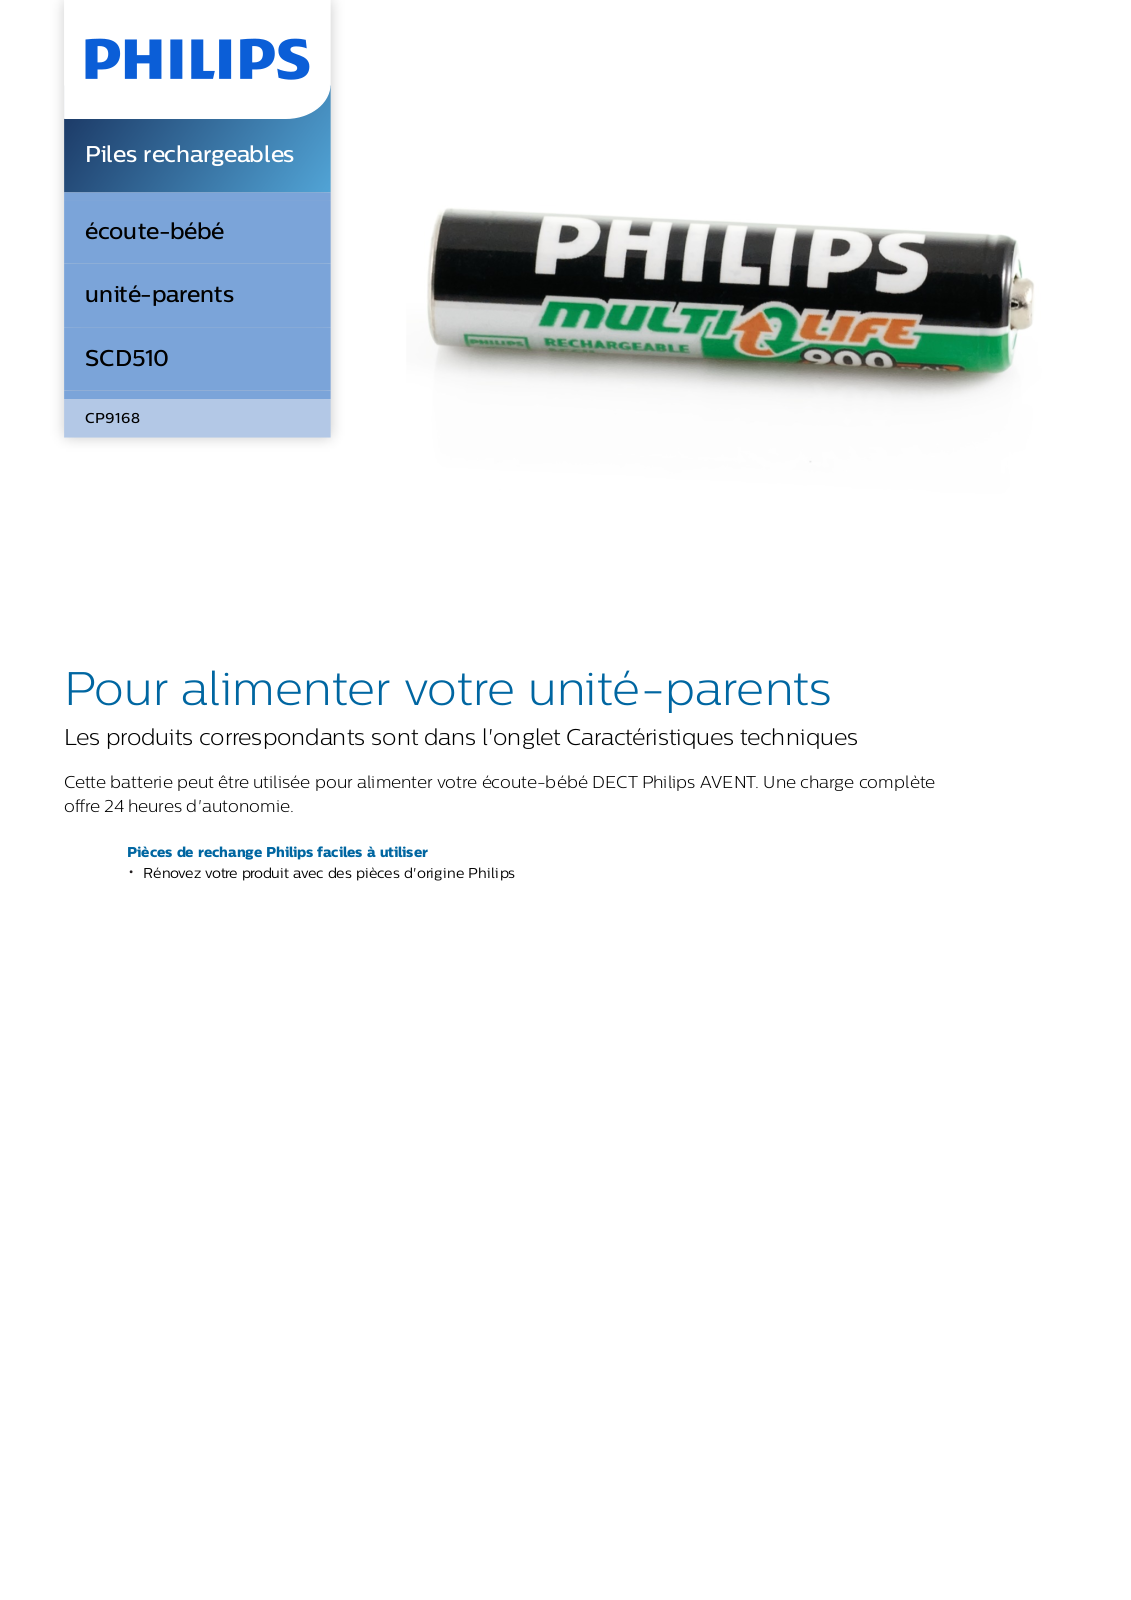 Philips CP9168/01 product sheet